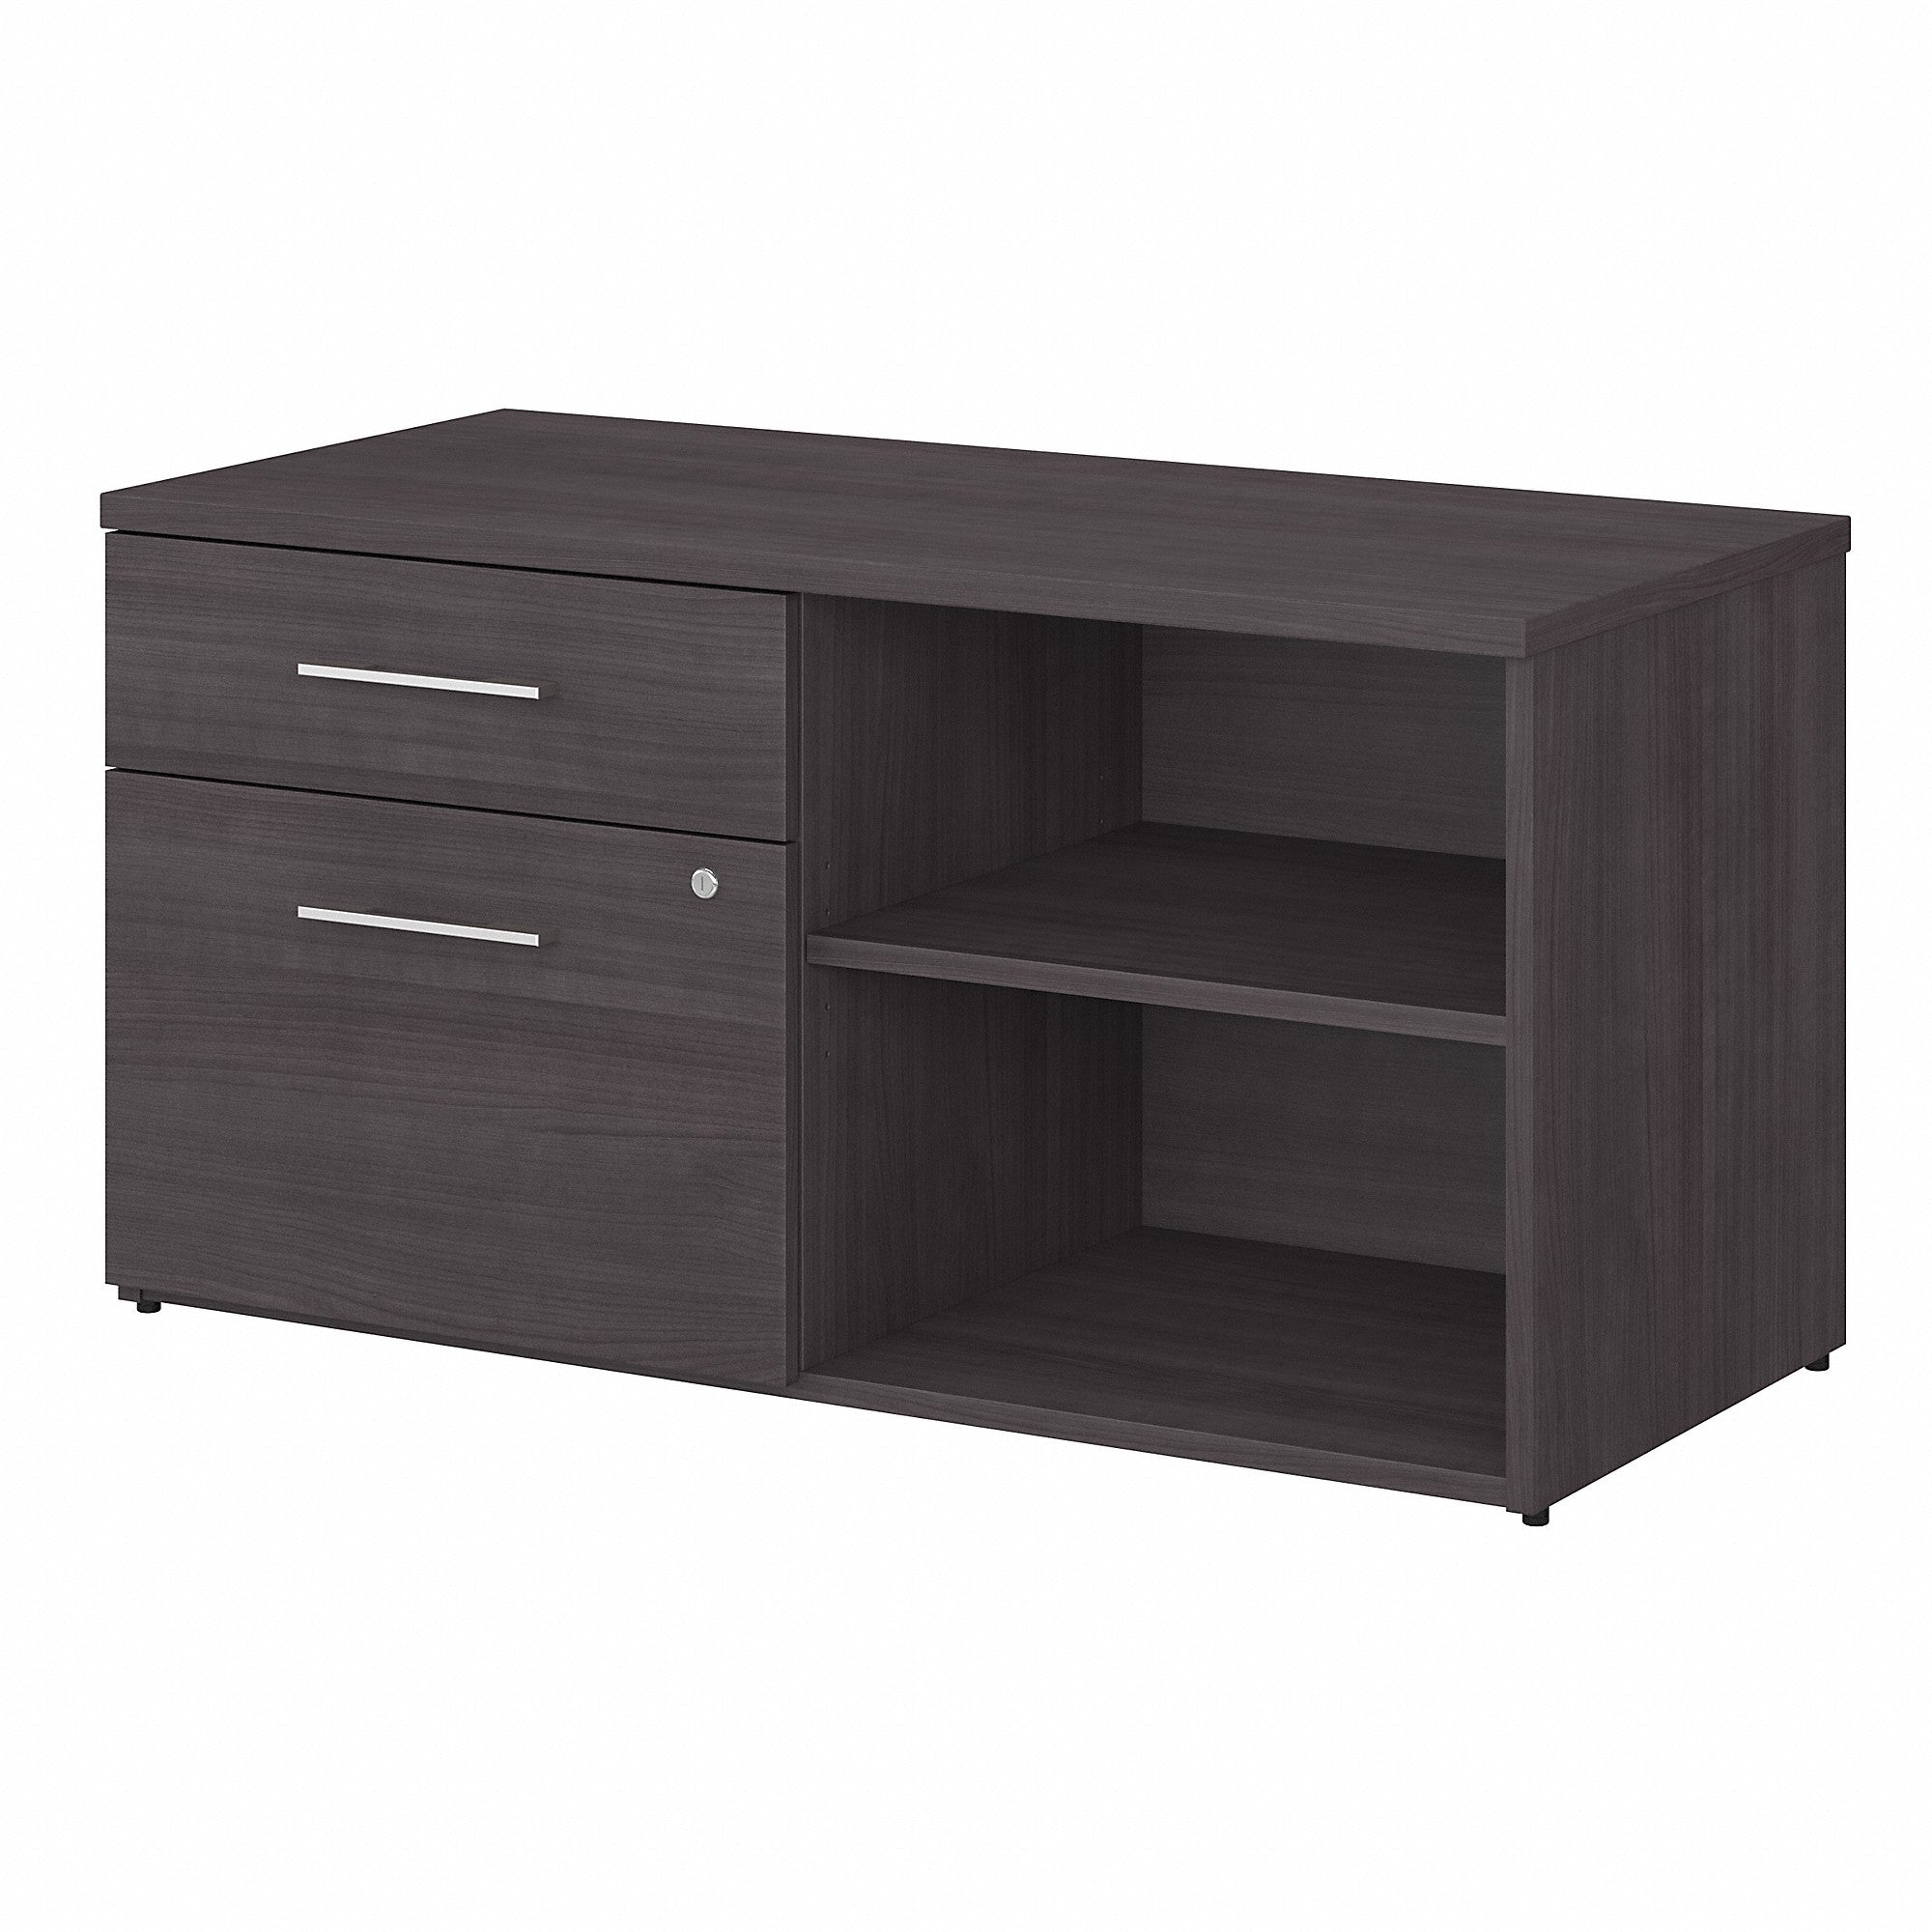 Bush Business Furniture Office 500 Low Storage Cabinet with Drawers and Shelves | Storm Gray